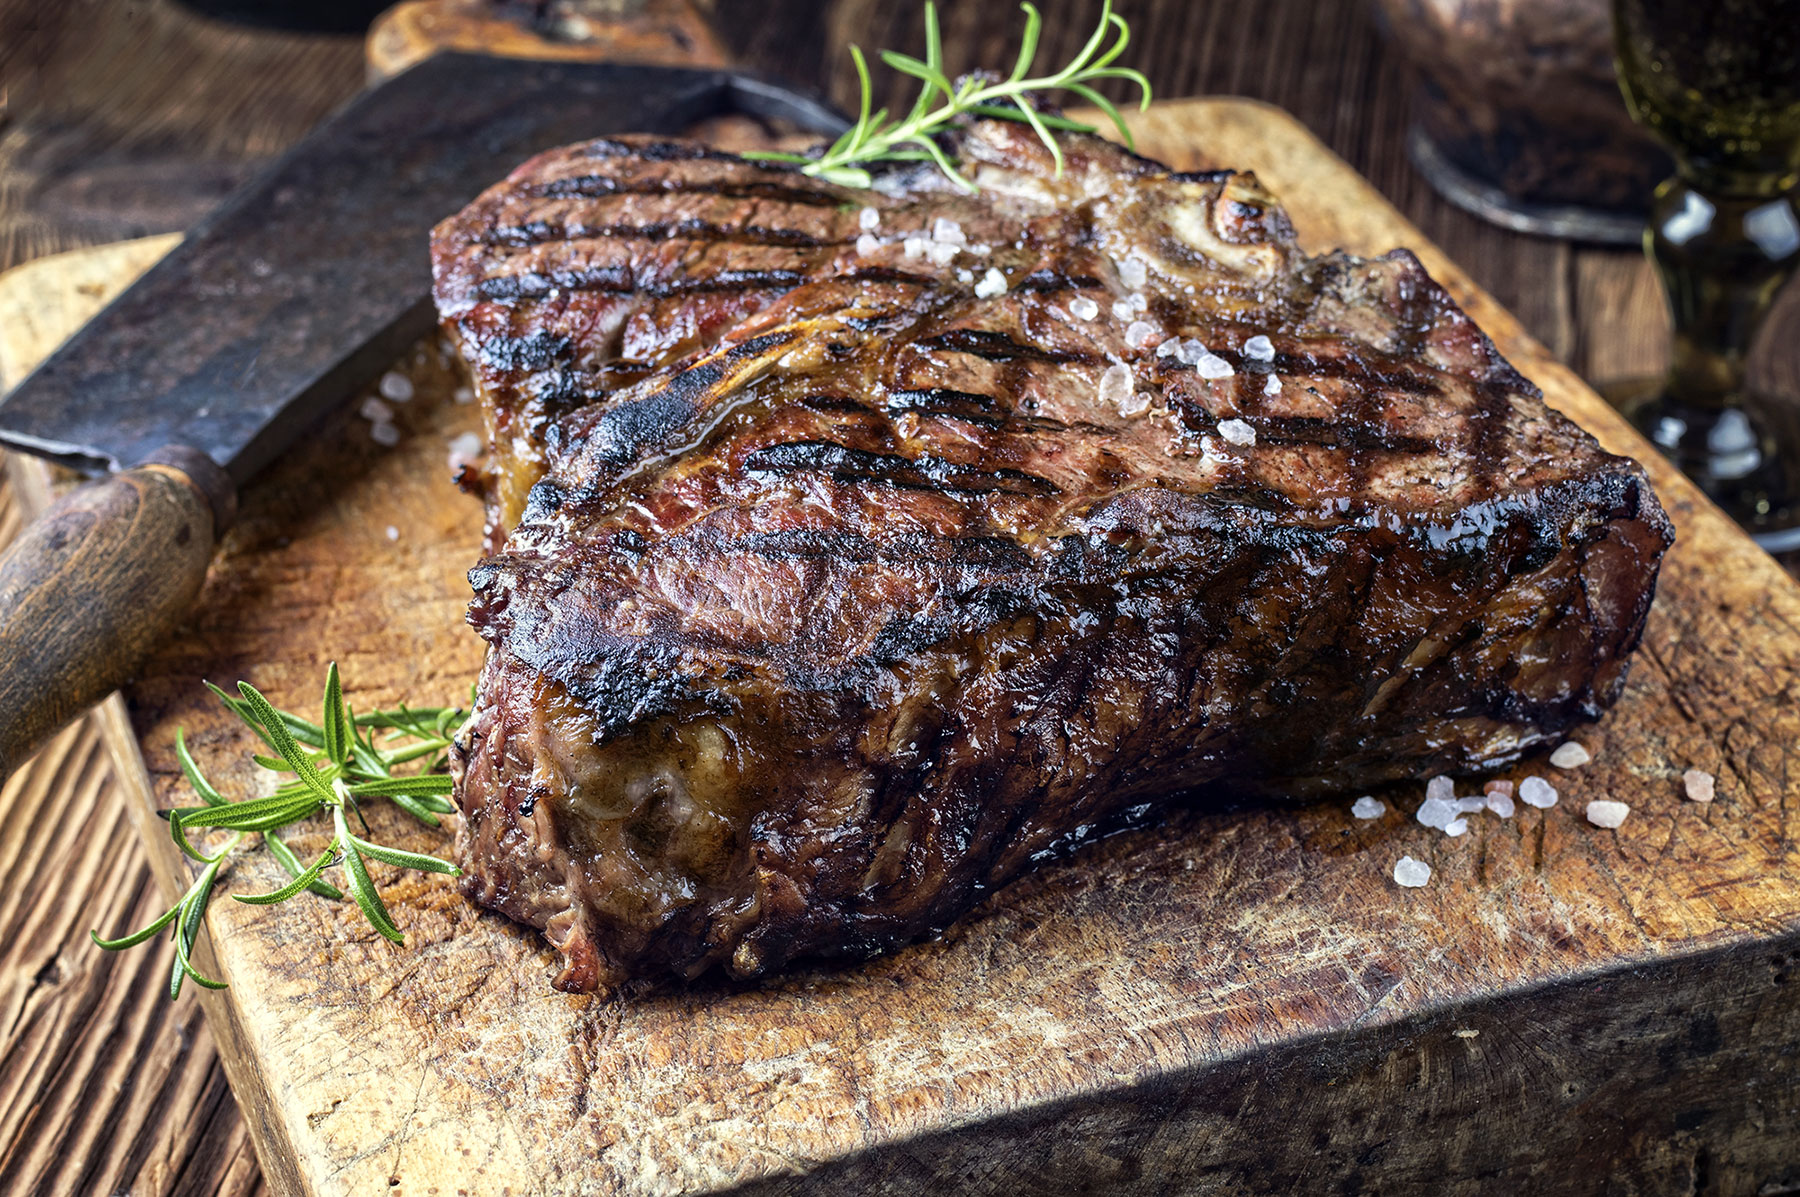 How to Grill a Well Done Steak
